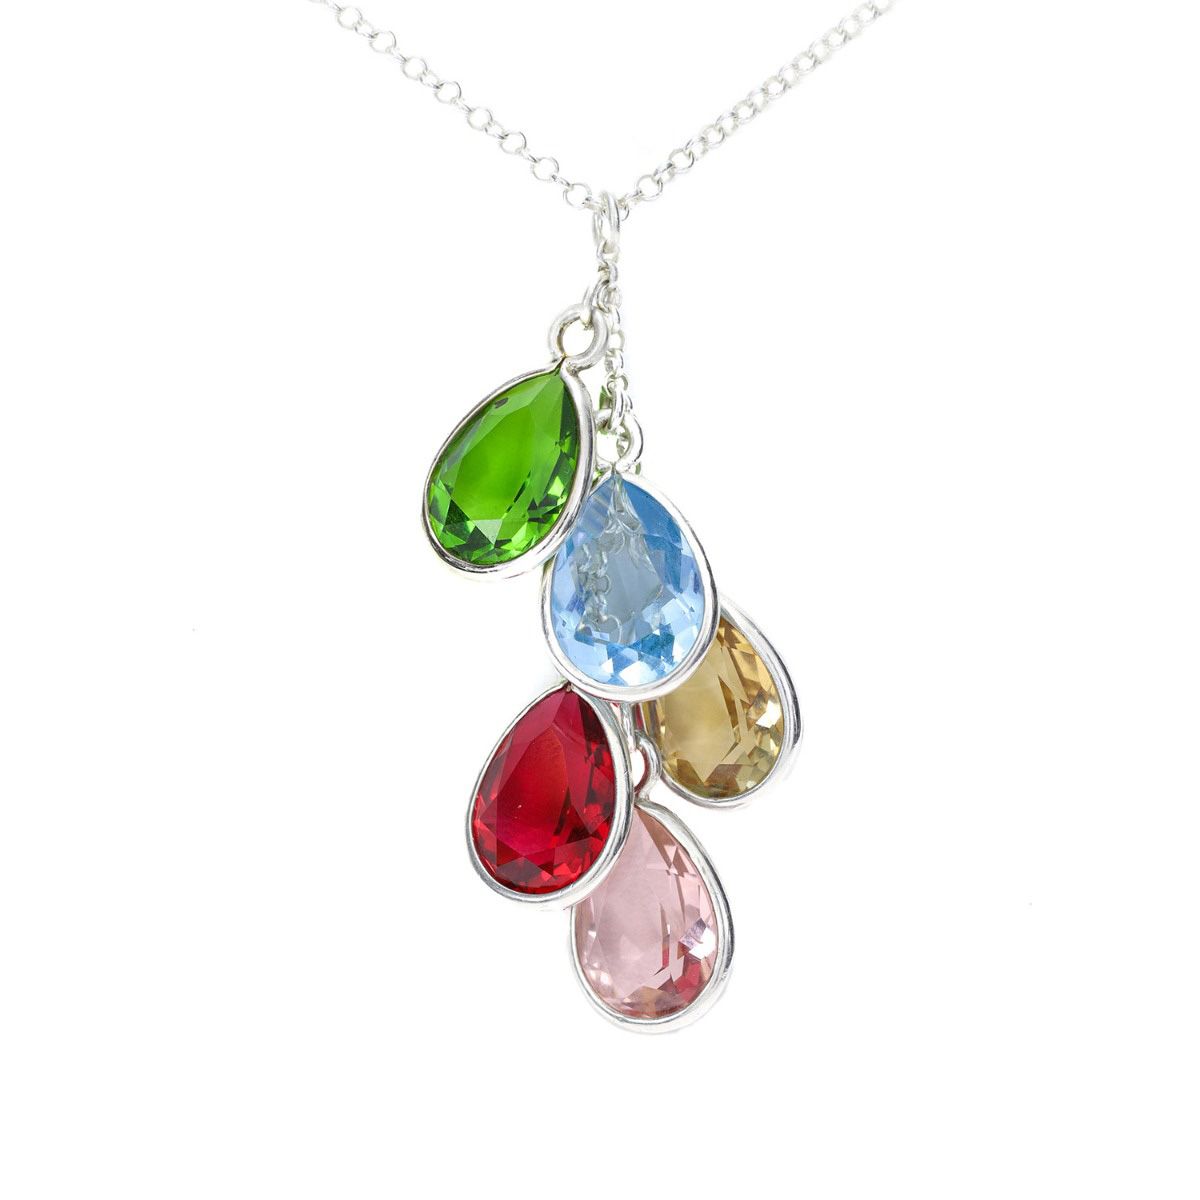 Enchanted Charm Necklace for Her in Silver by Talisa - Charm